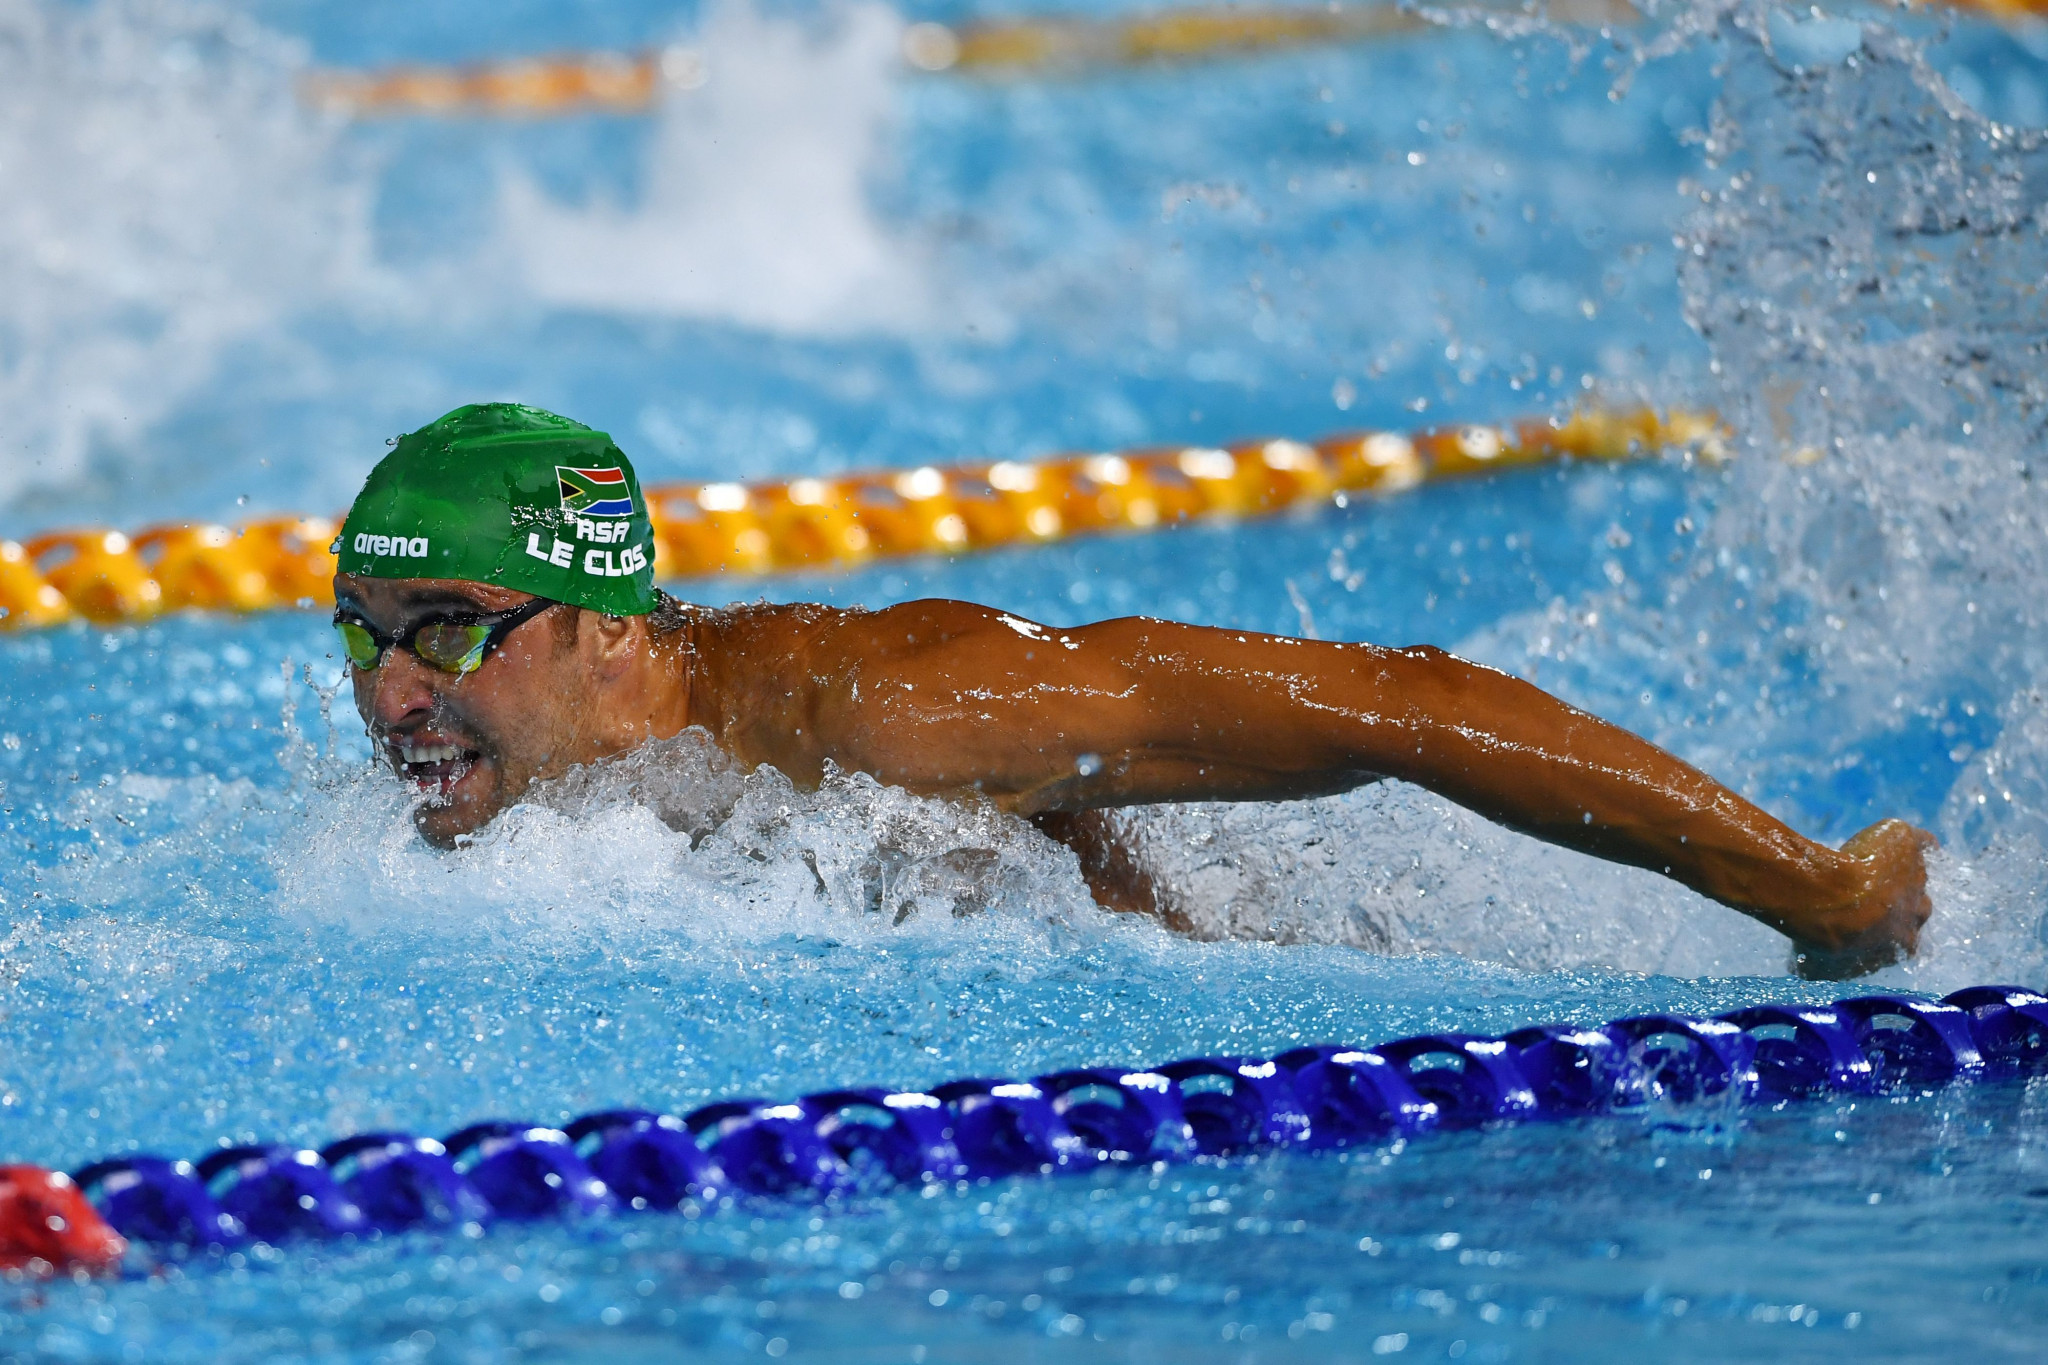 SPD Bank CCC will partner the events in which major names, such as Chad le Clos, will be competing at ©Getty Images